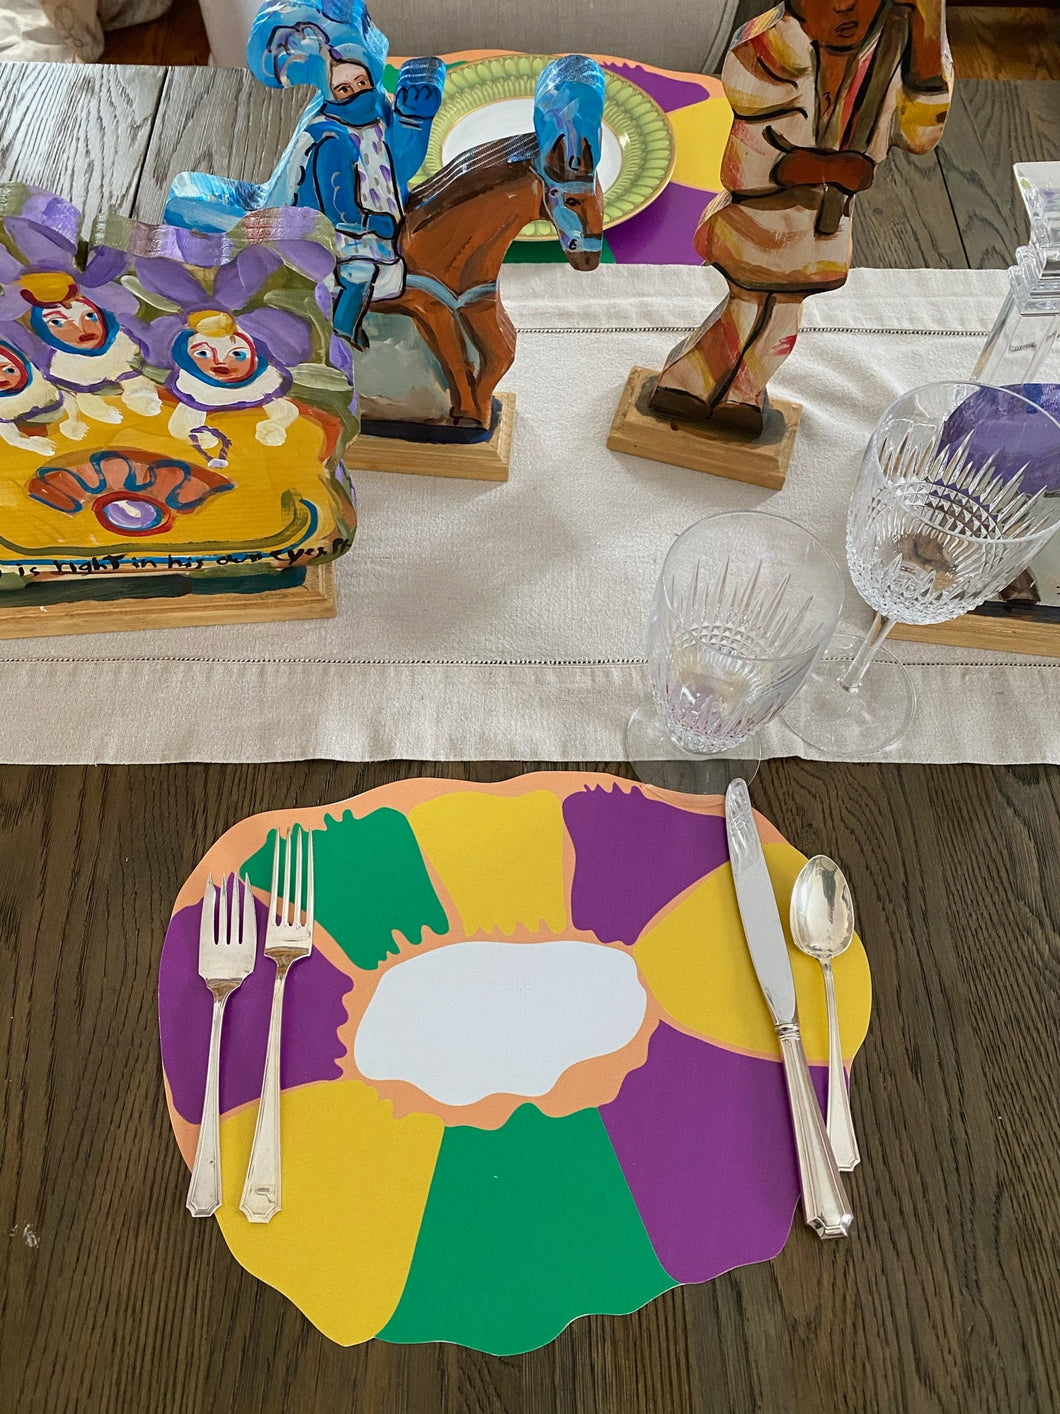 Mardi Gras King Cake Placemat Louisiana New Orleans Purple Green Gold Carnival Table Setting Throw me something mister Krewe